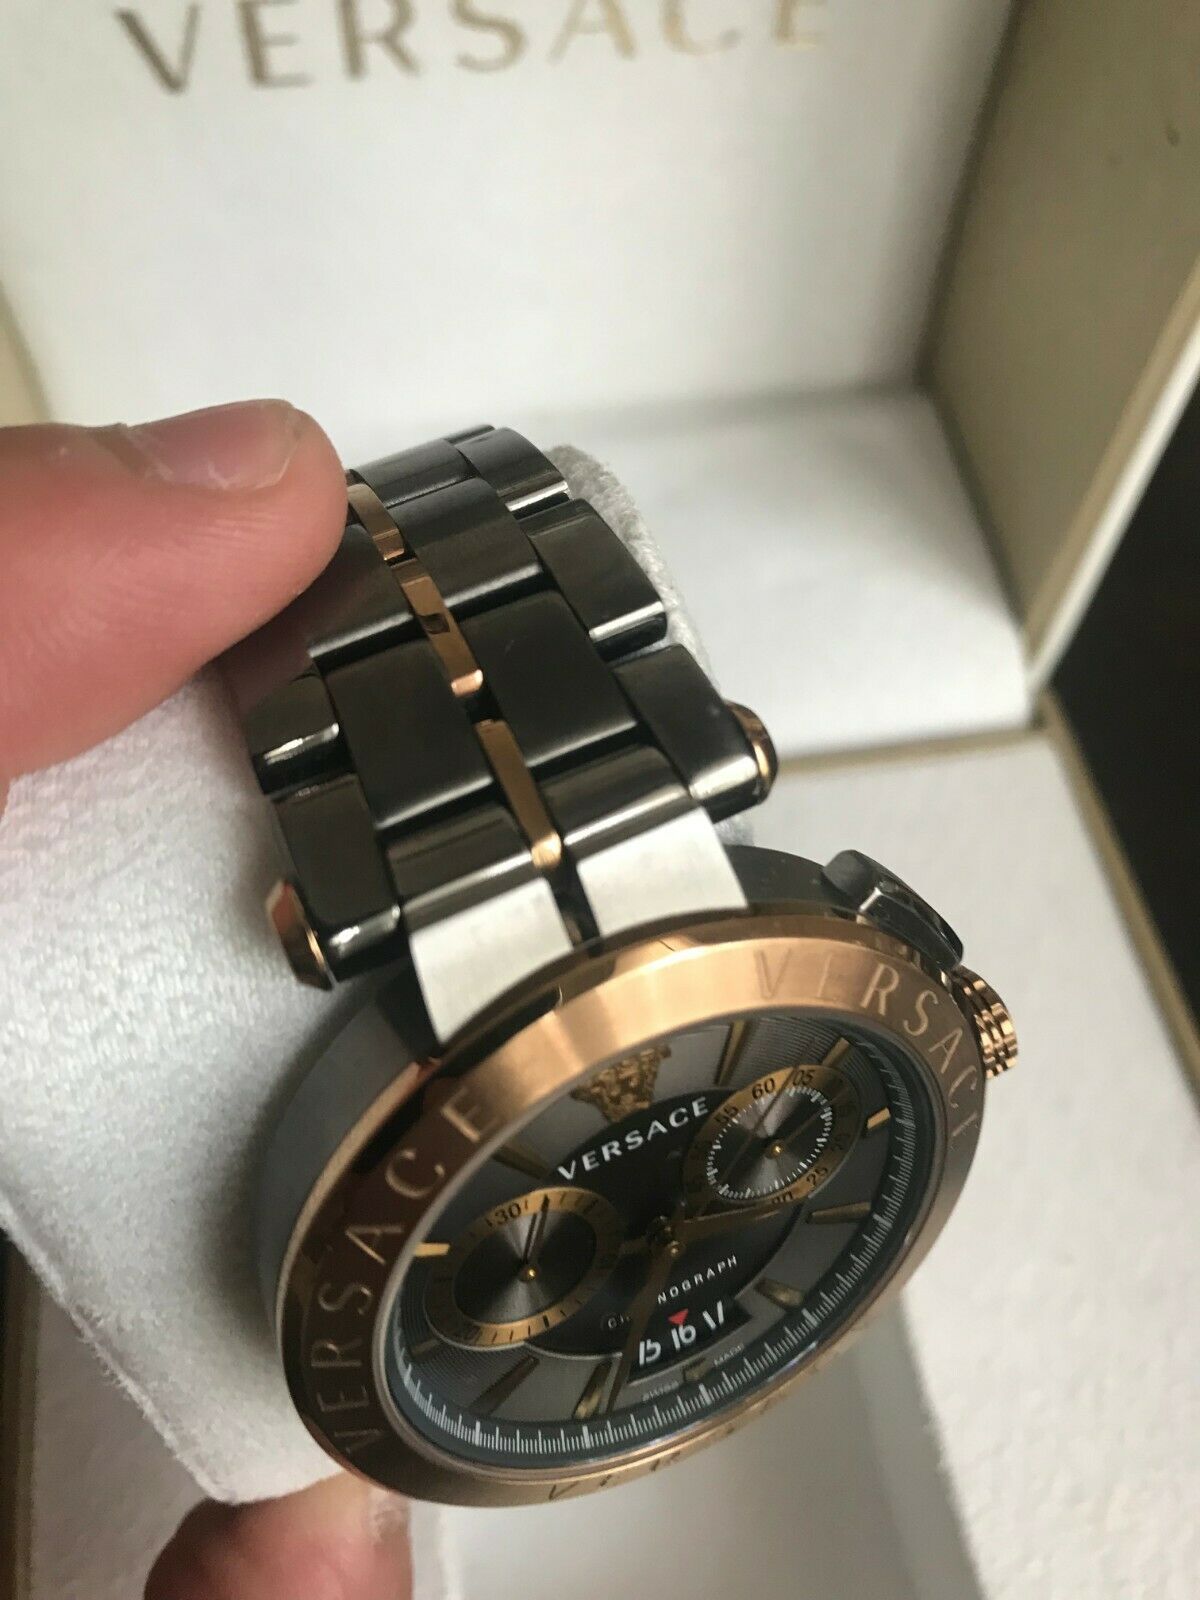 versace silver tone aion watch